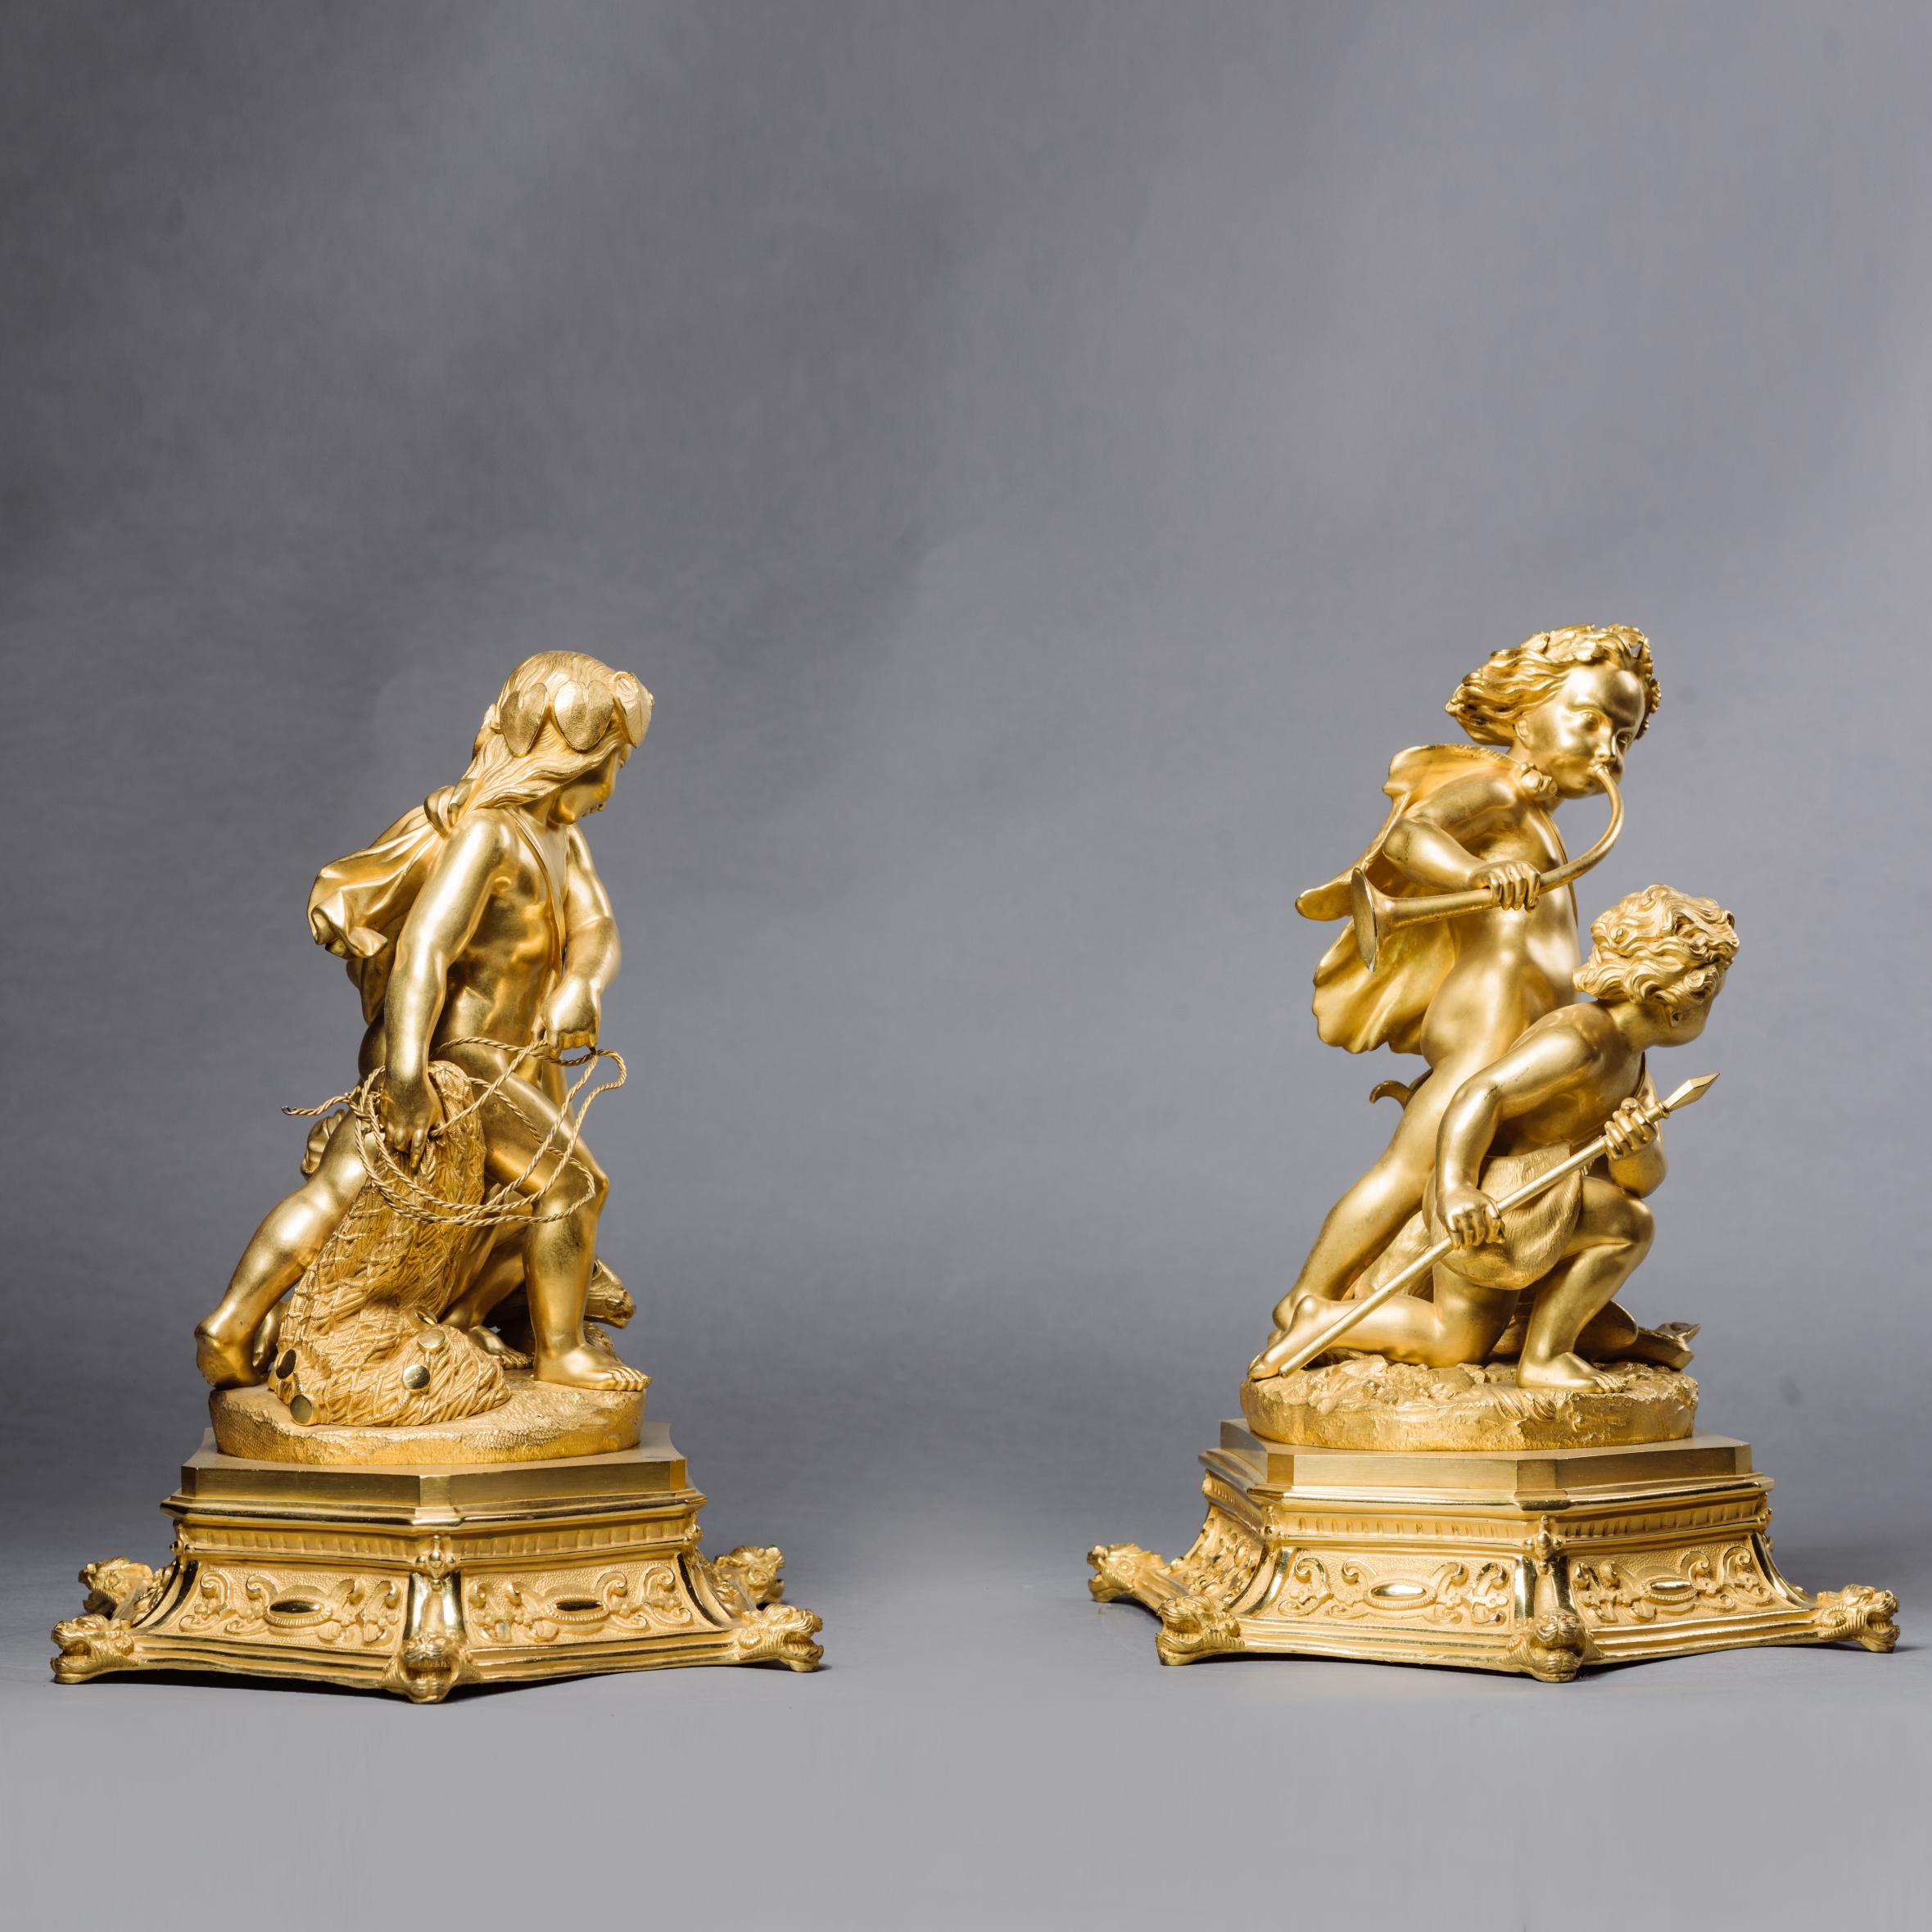 19th Century Pair of Restoration Period Gilt-Bronze Figural Groups. French, circa 1830 For Sale